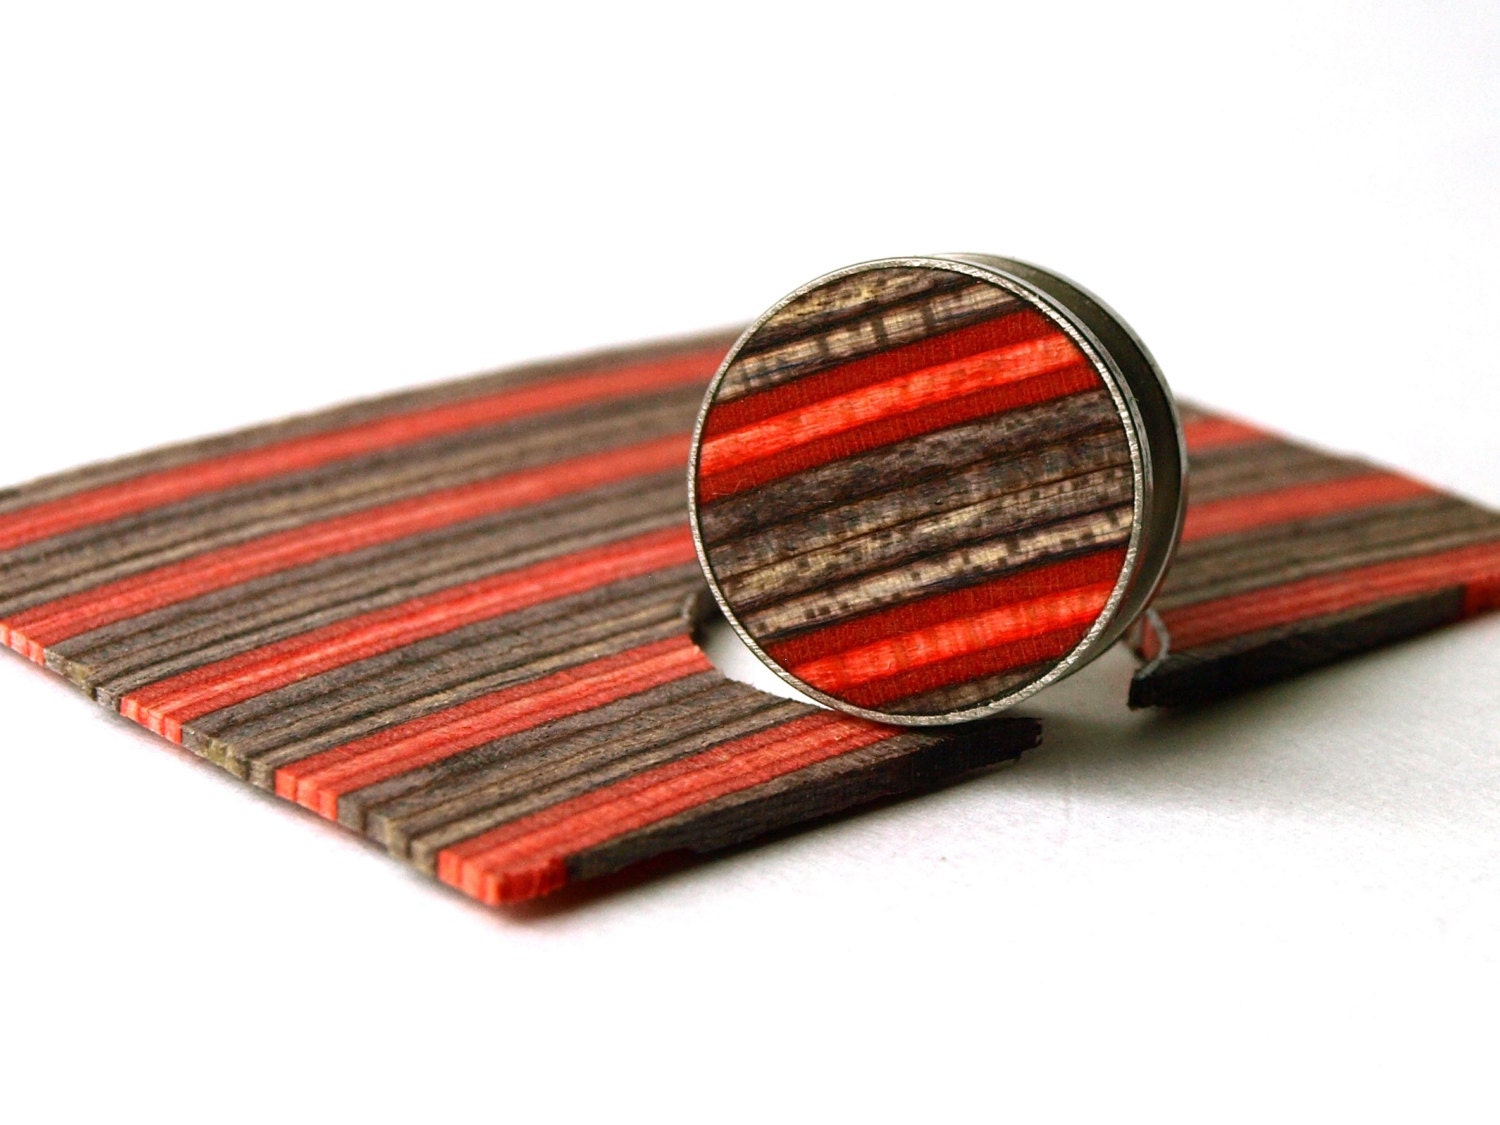 Red & Black - Stainless Steel Ear Plugs with recycled skateboards inlay - Made in Canada - SecondShot